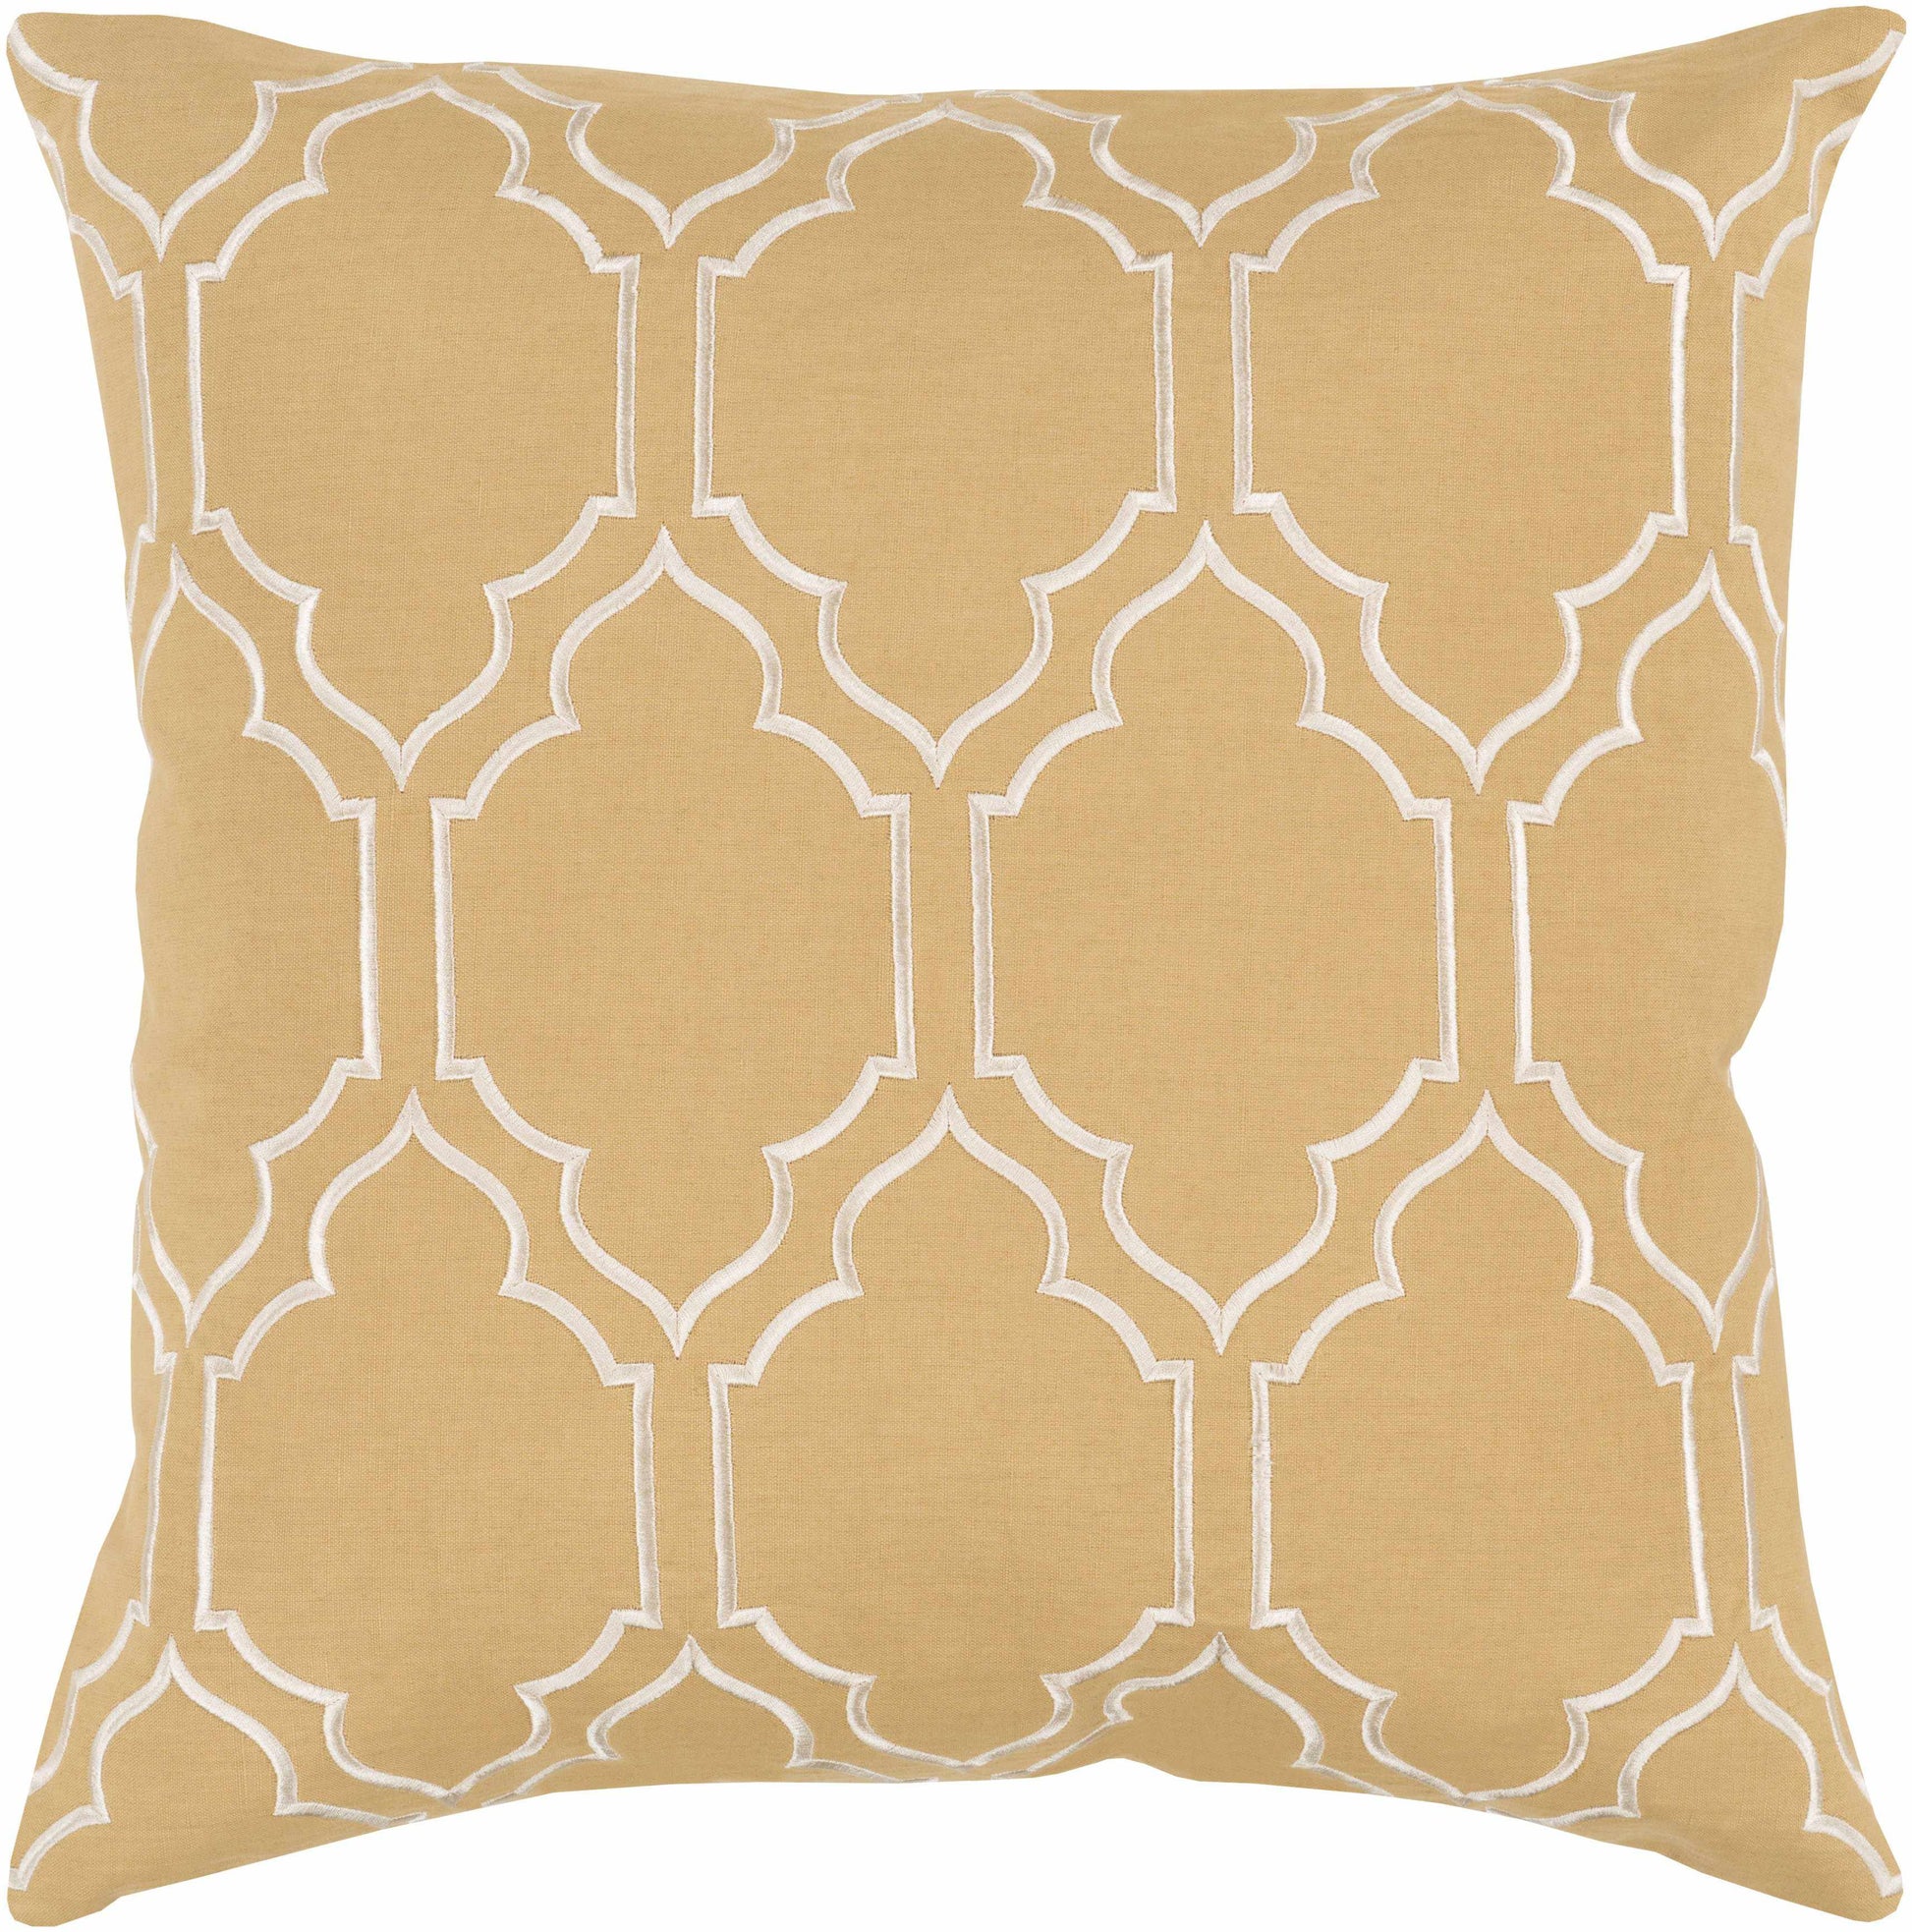 Evere Wheat Pillow Cover